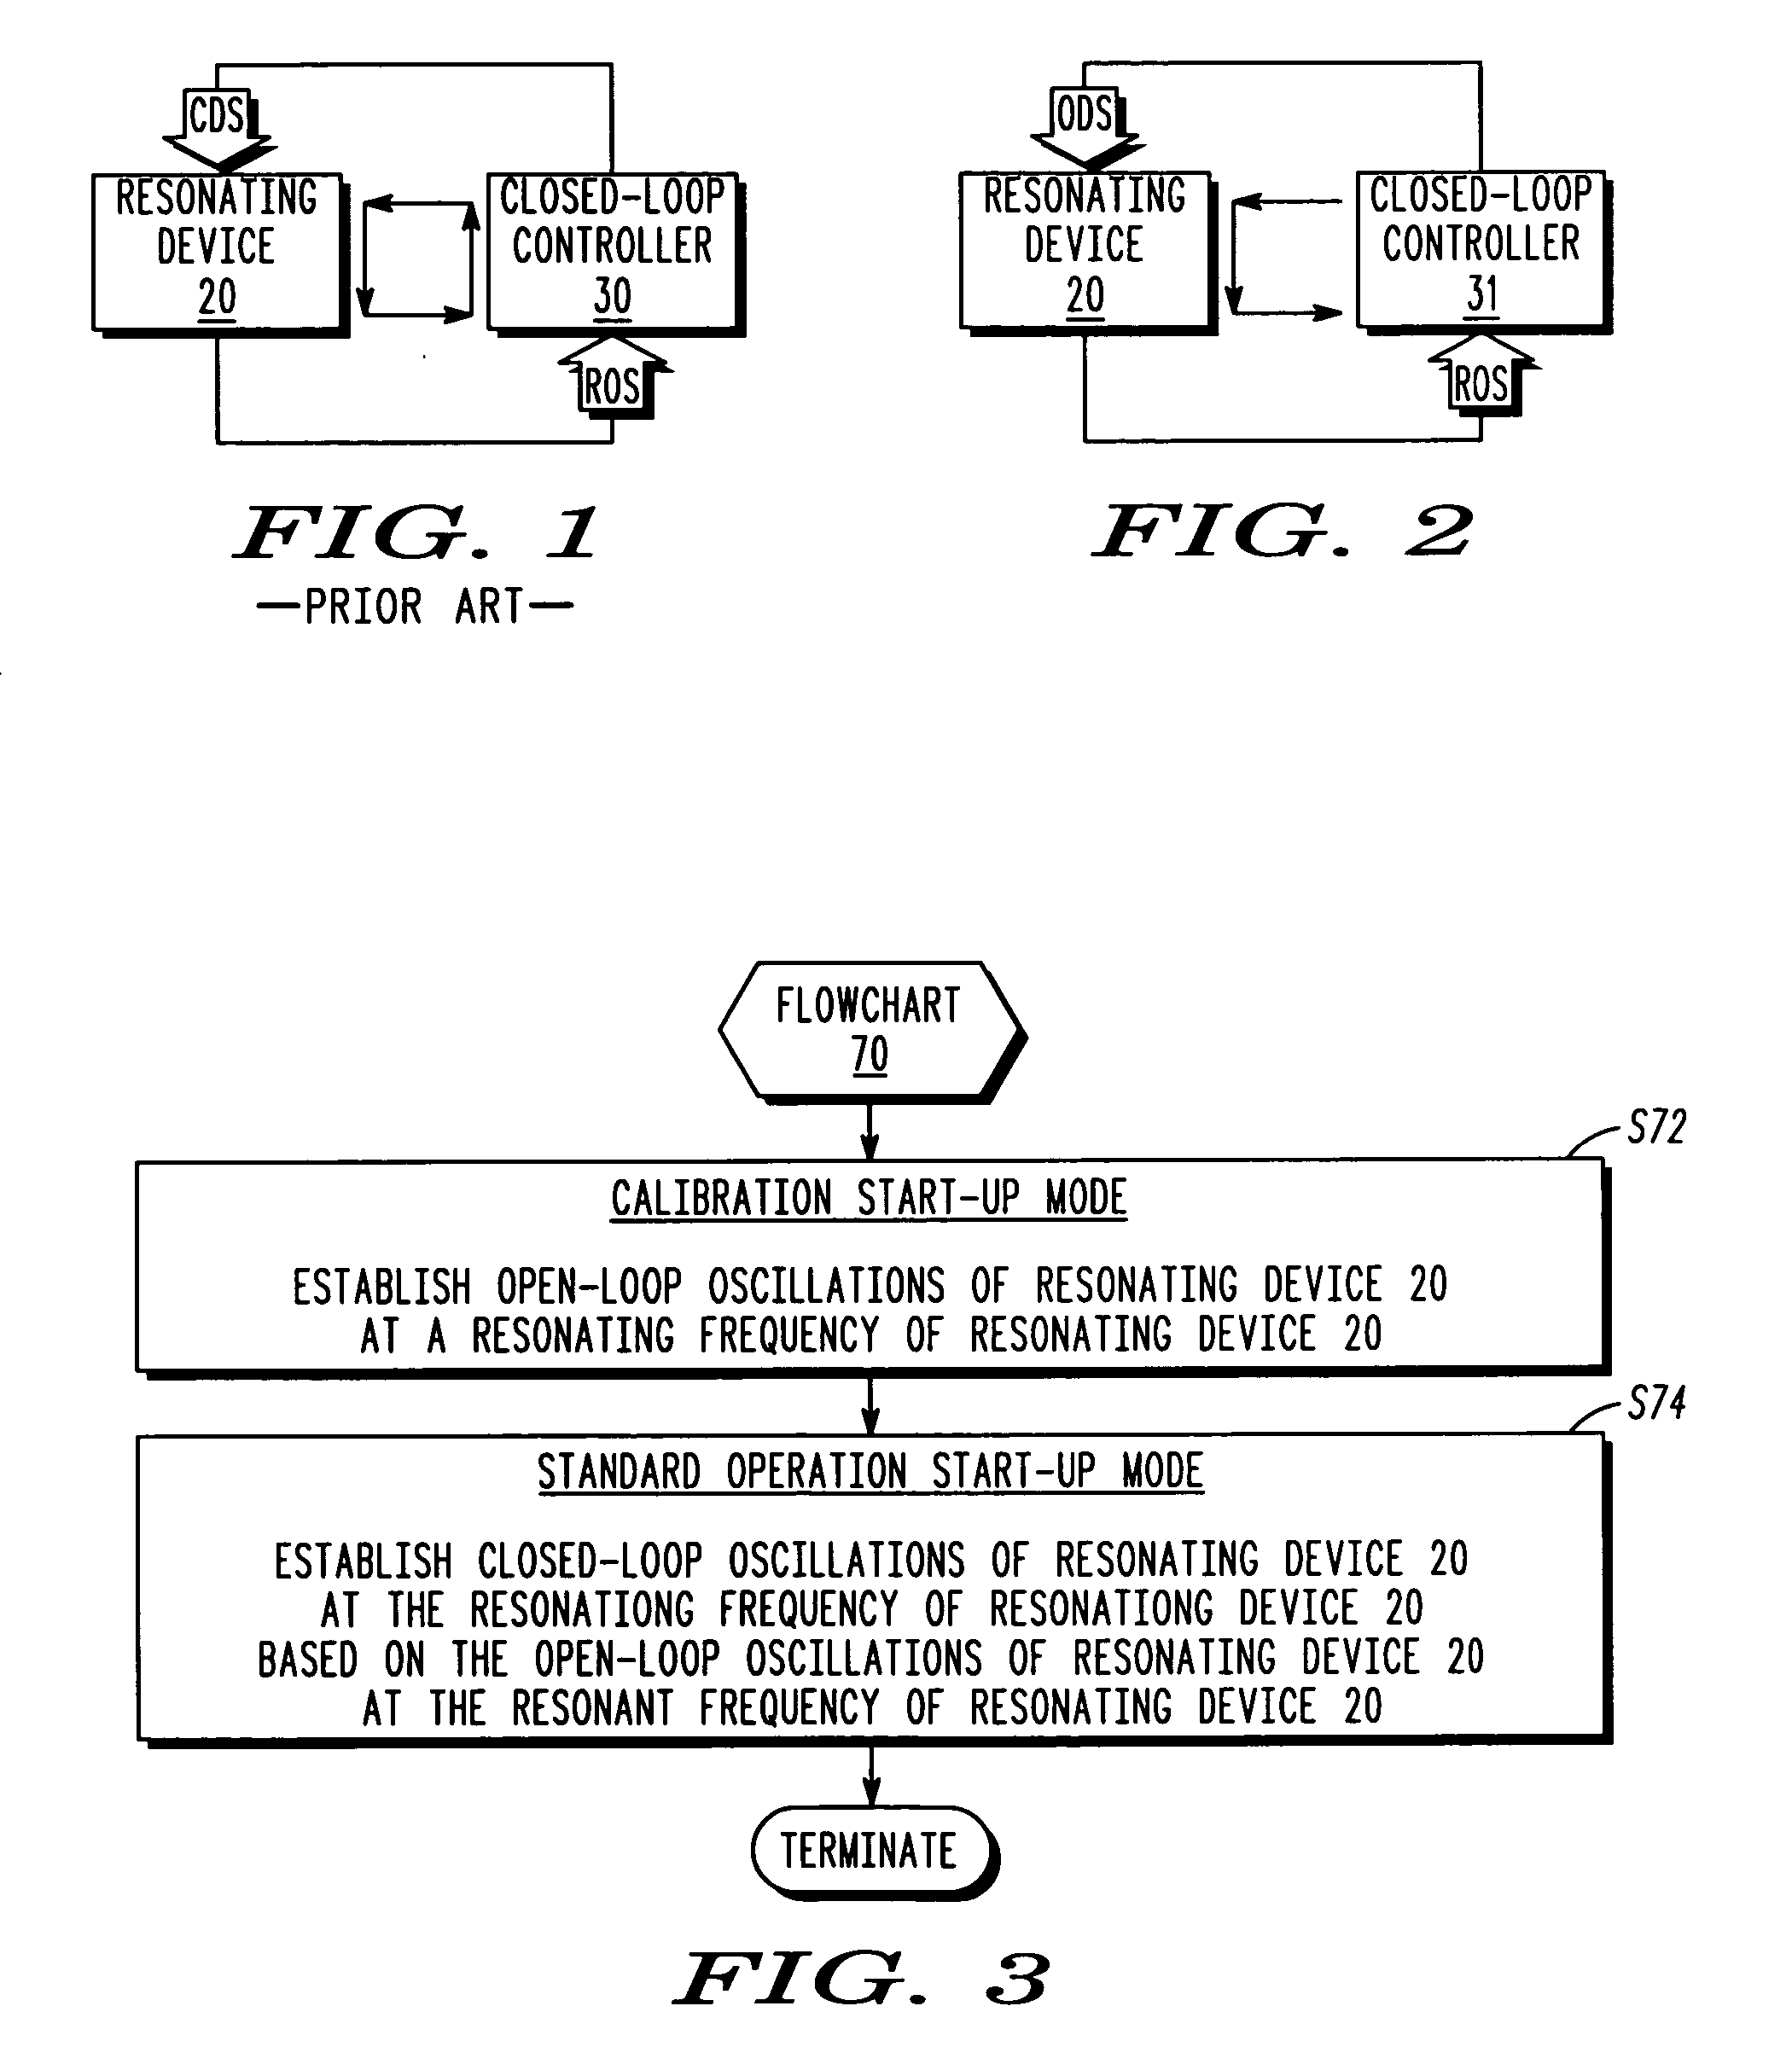 Open-loop start-up method for a resonating device